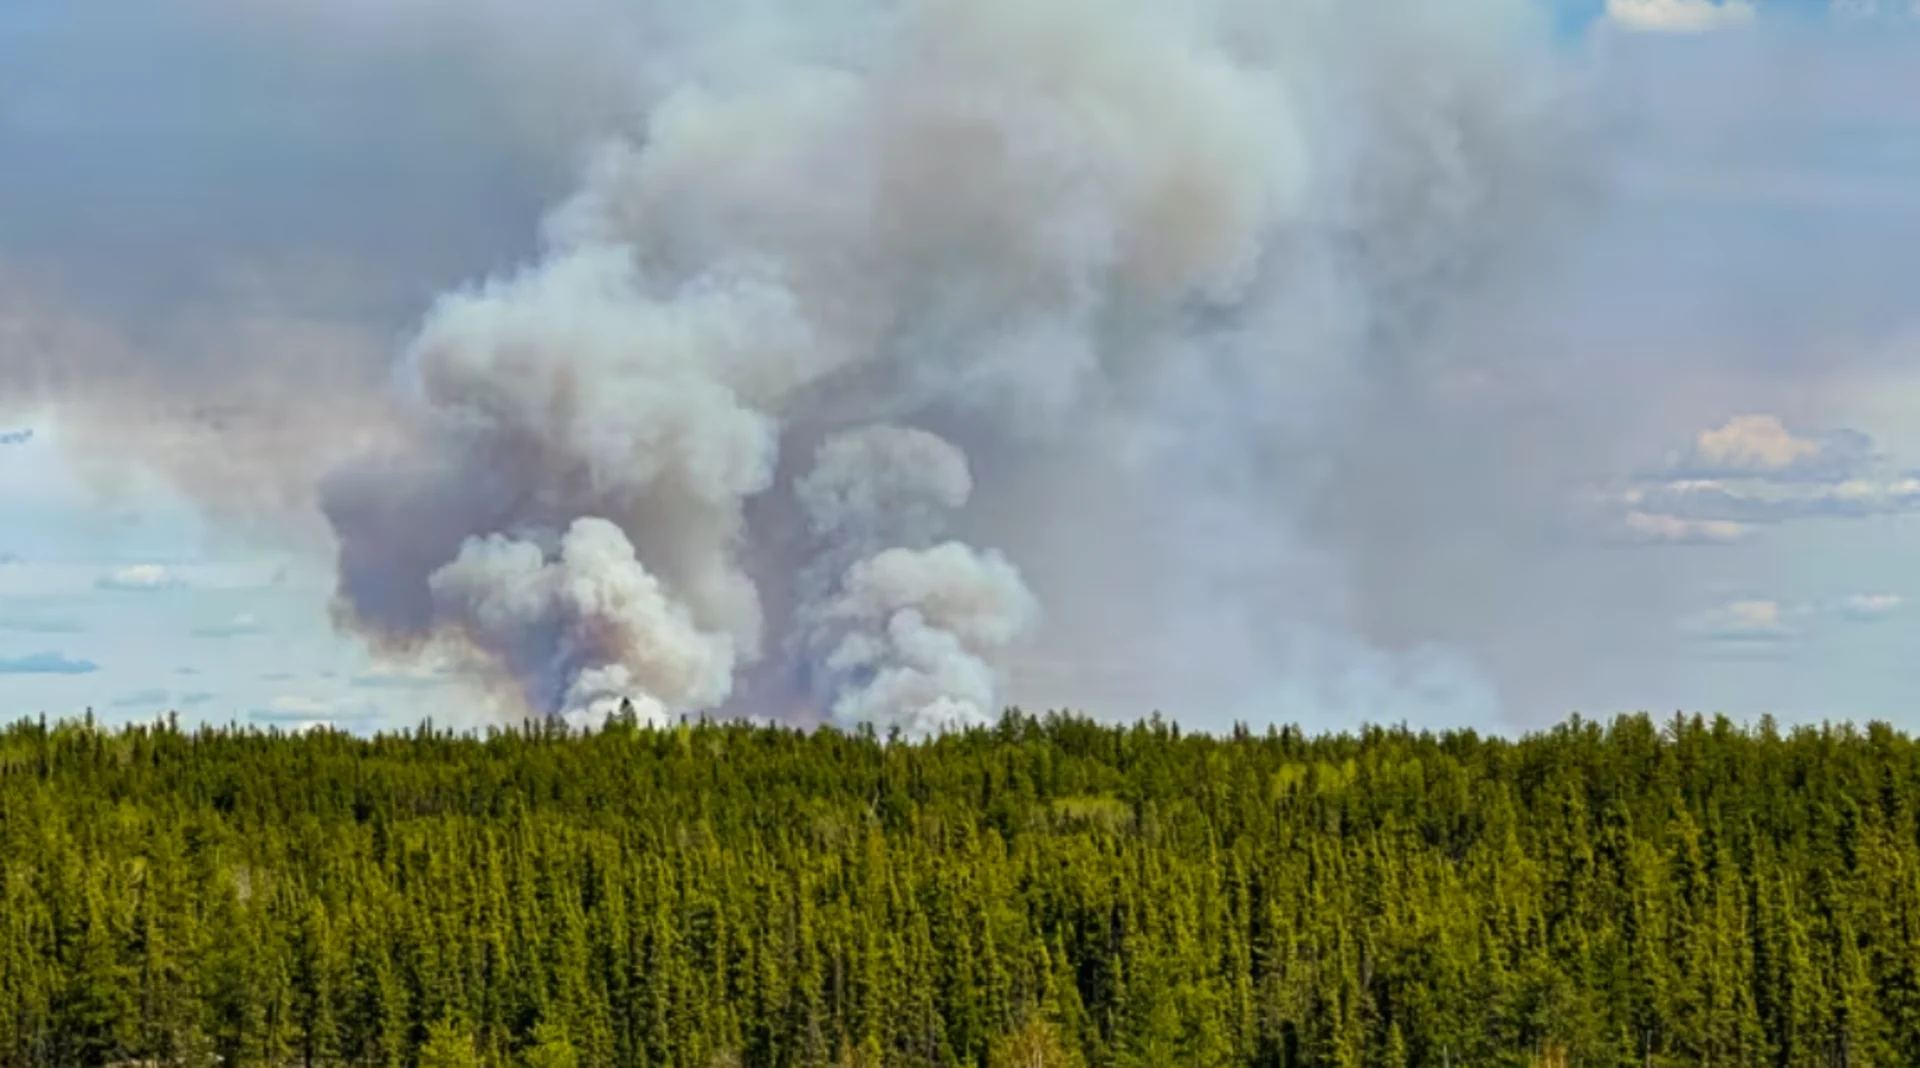 Cranberry Portage residents evacuate, parts of Hwy 10 close as wildfire burns